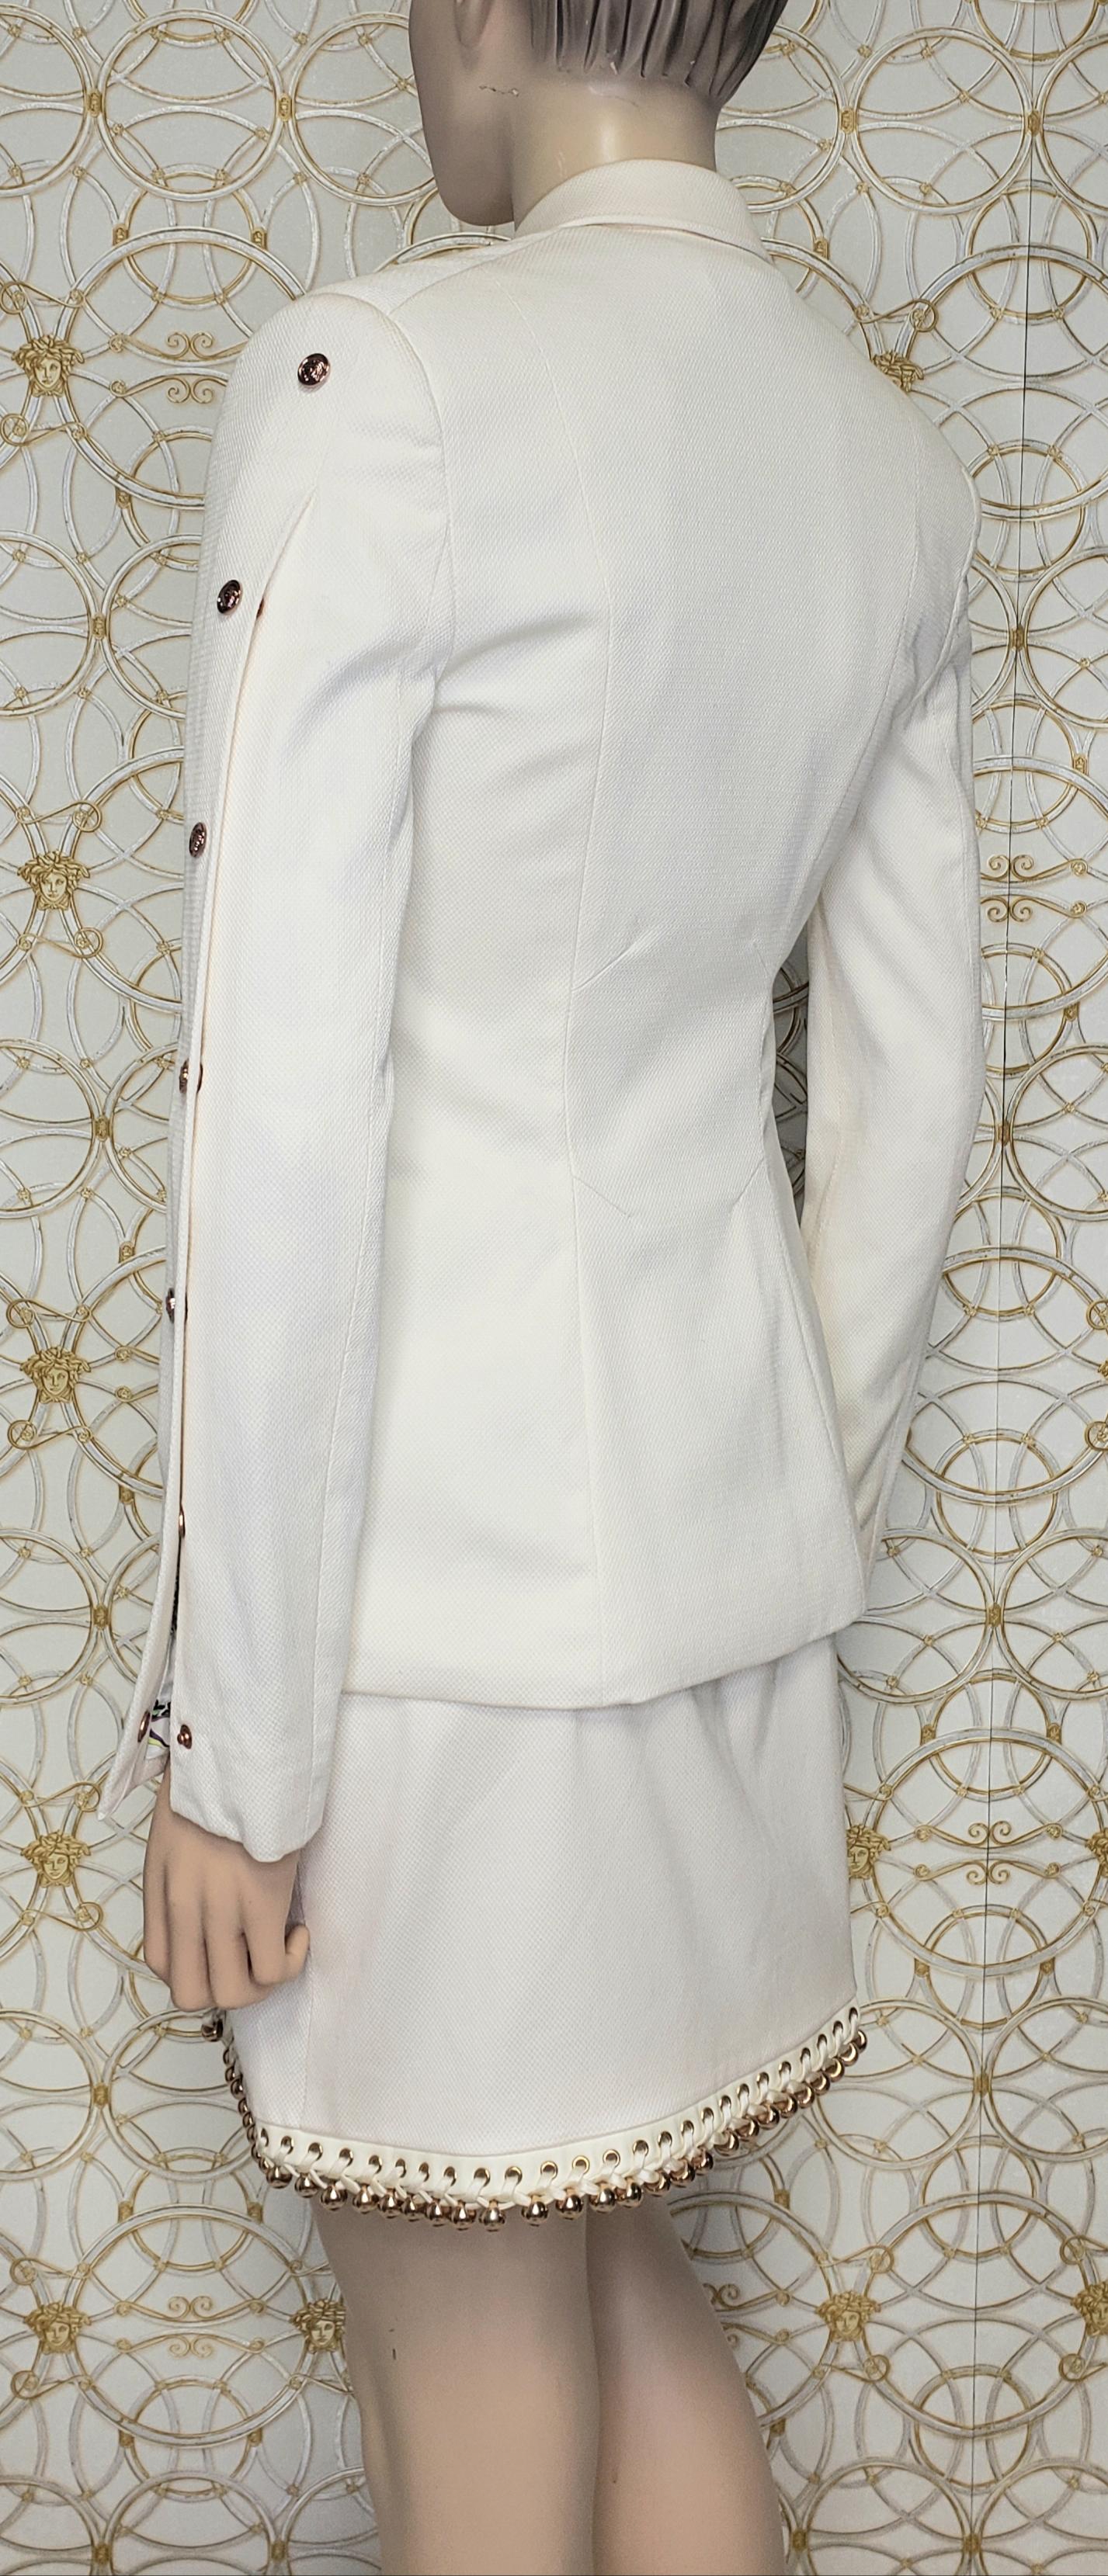 Resort 2013 look #1 NEW VERSACE OFF WHITE COTTON SKIRT SUIT For Sale 1